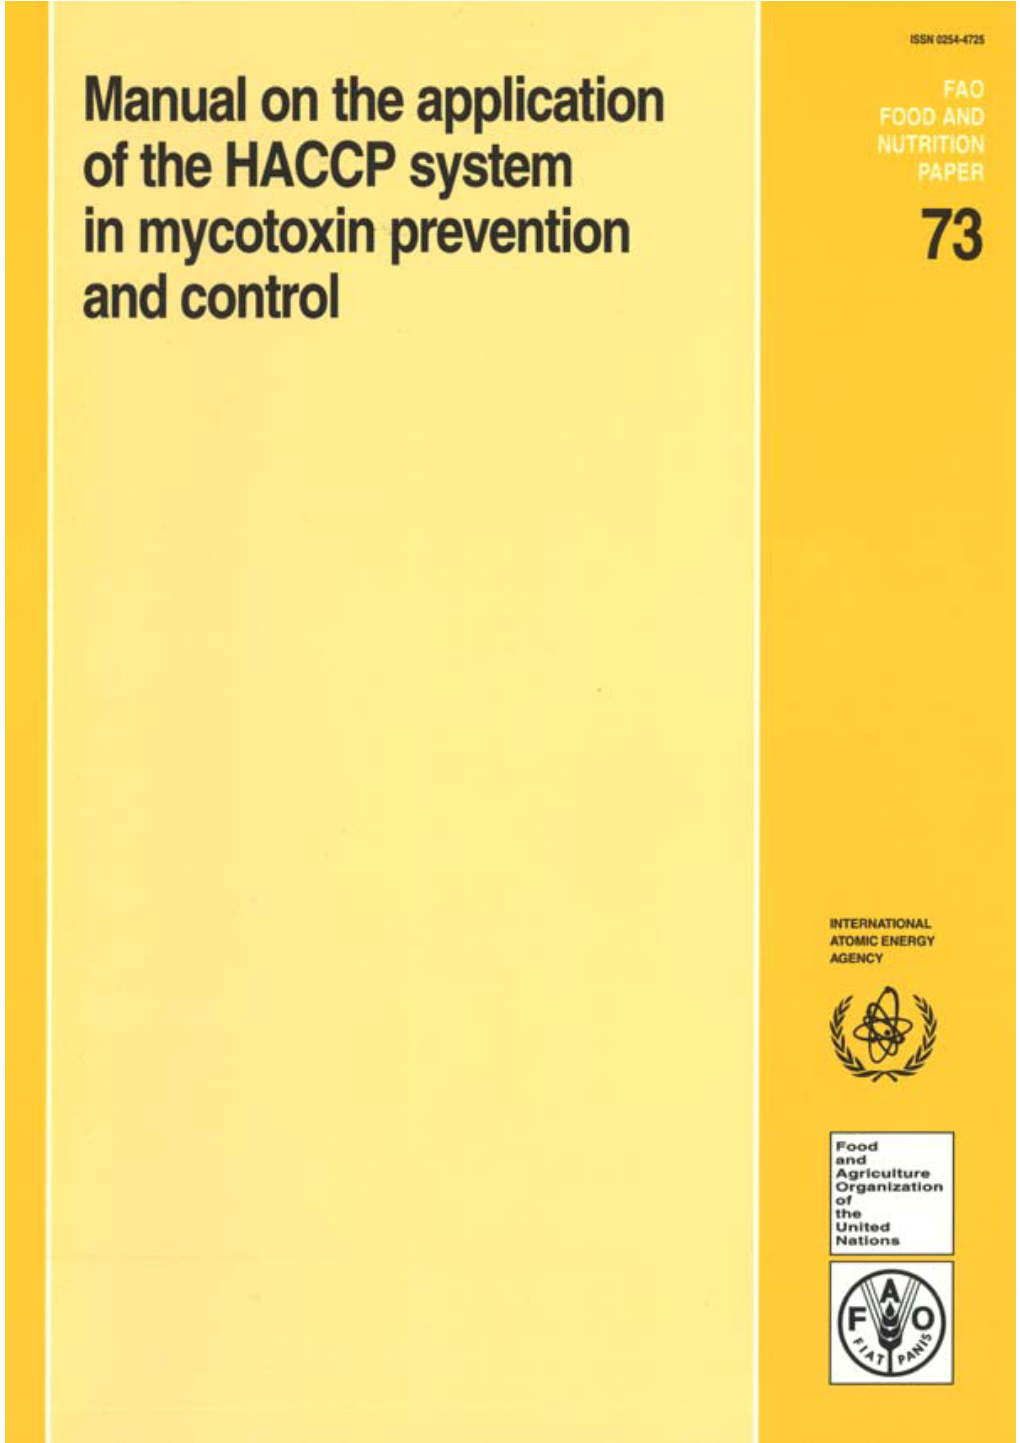 Manual on the Application of the HACCP System in Mycotoxin